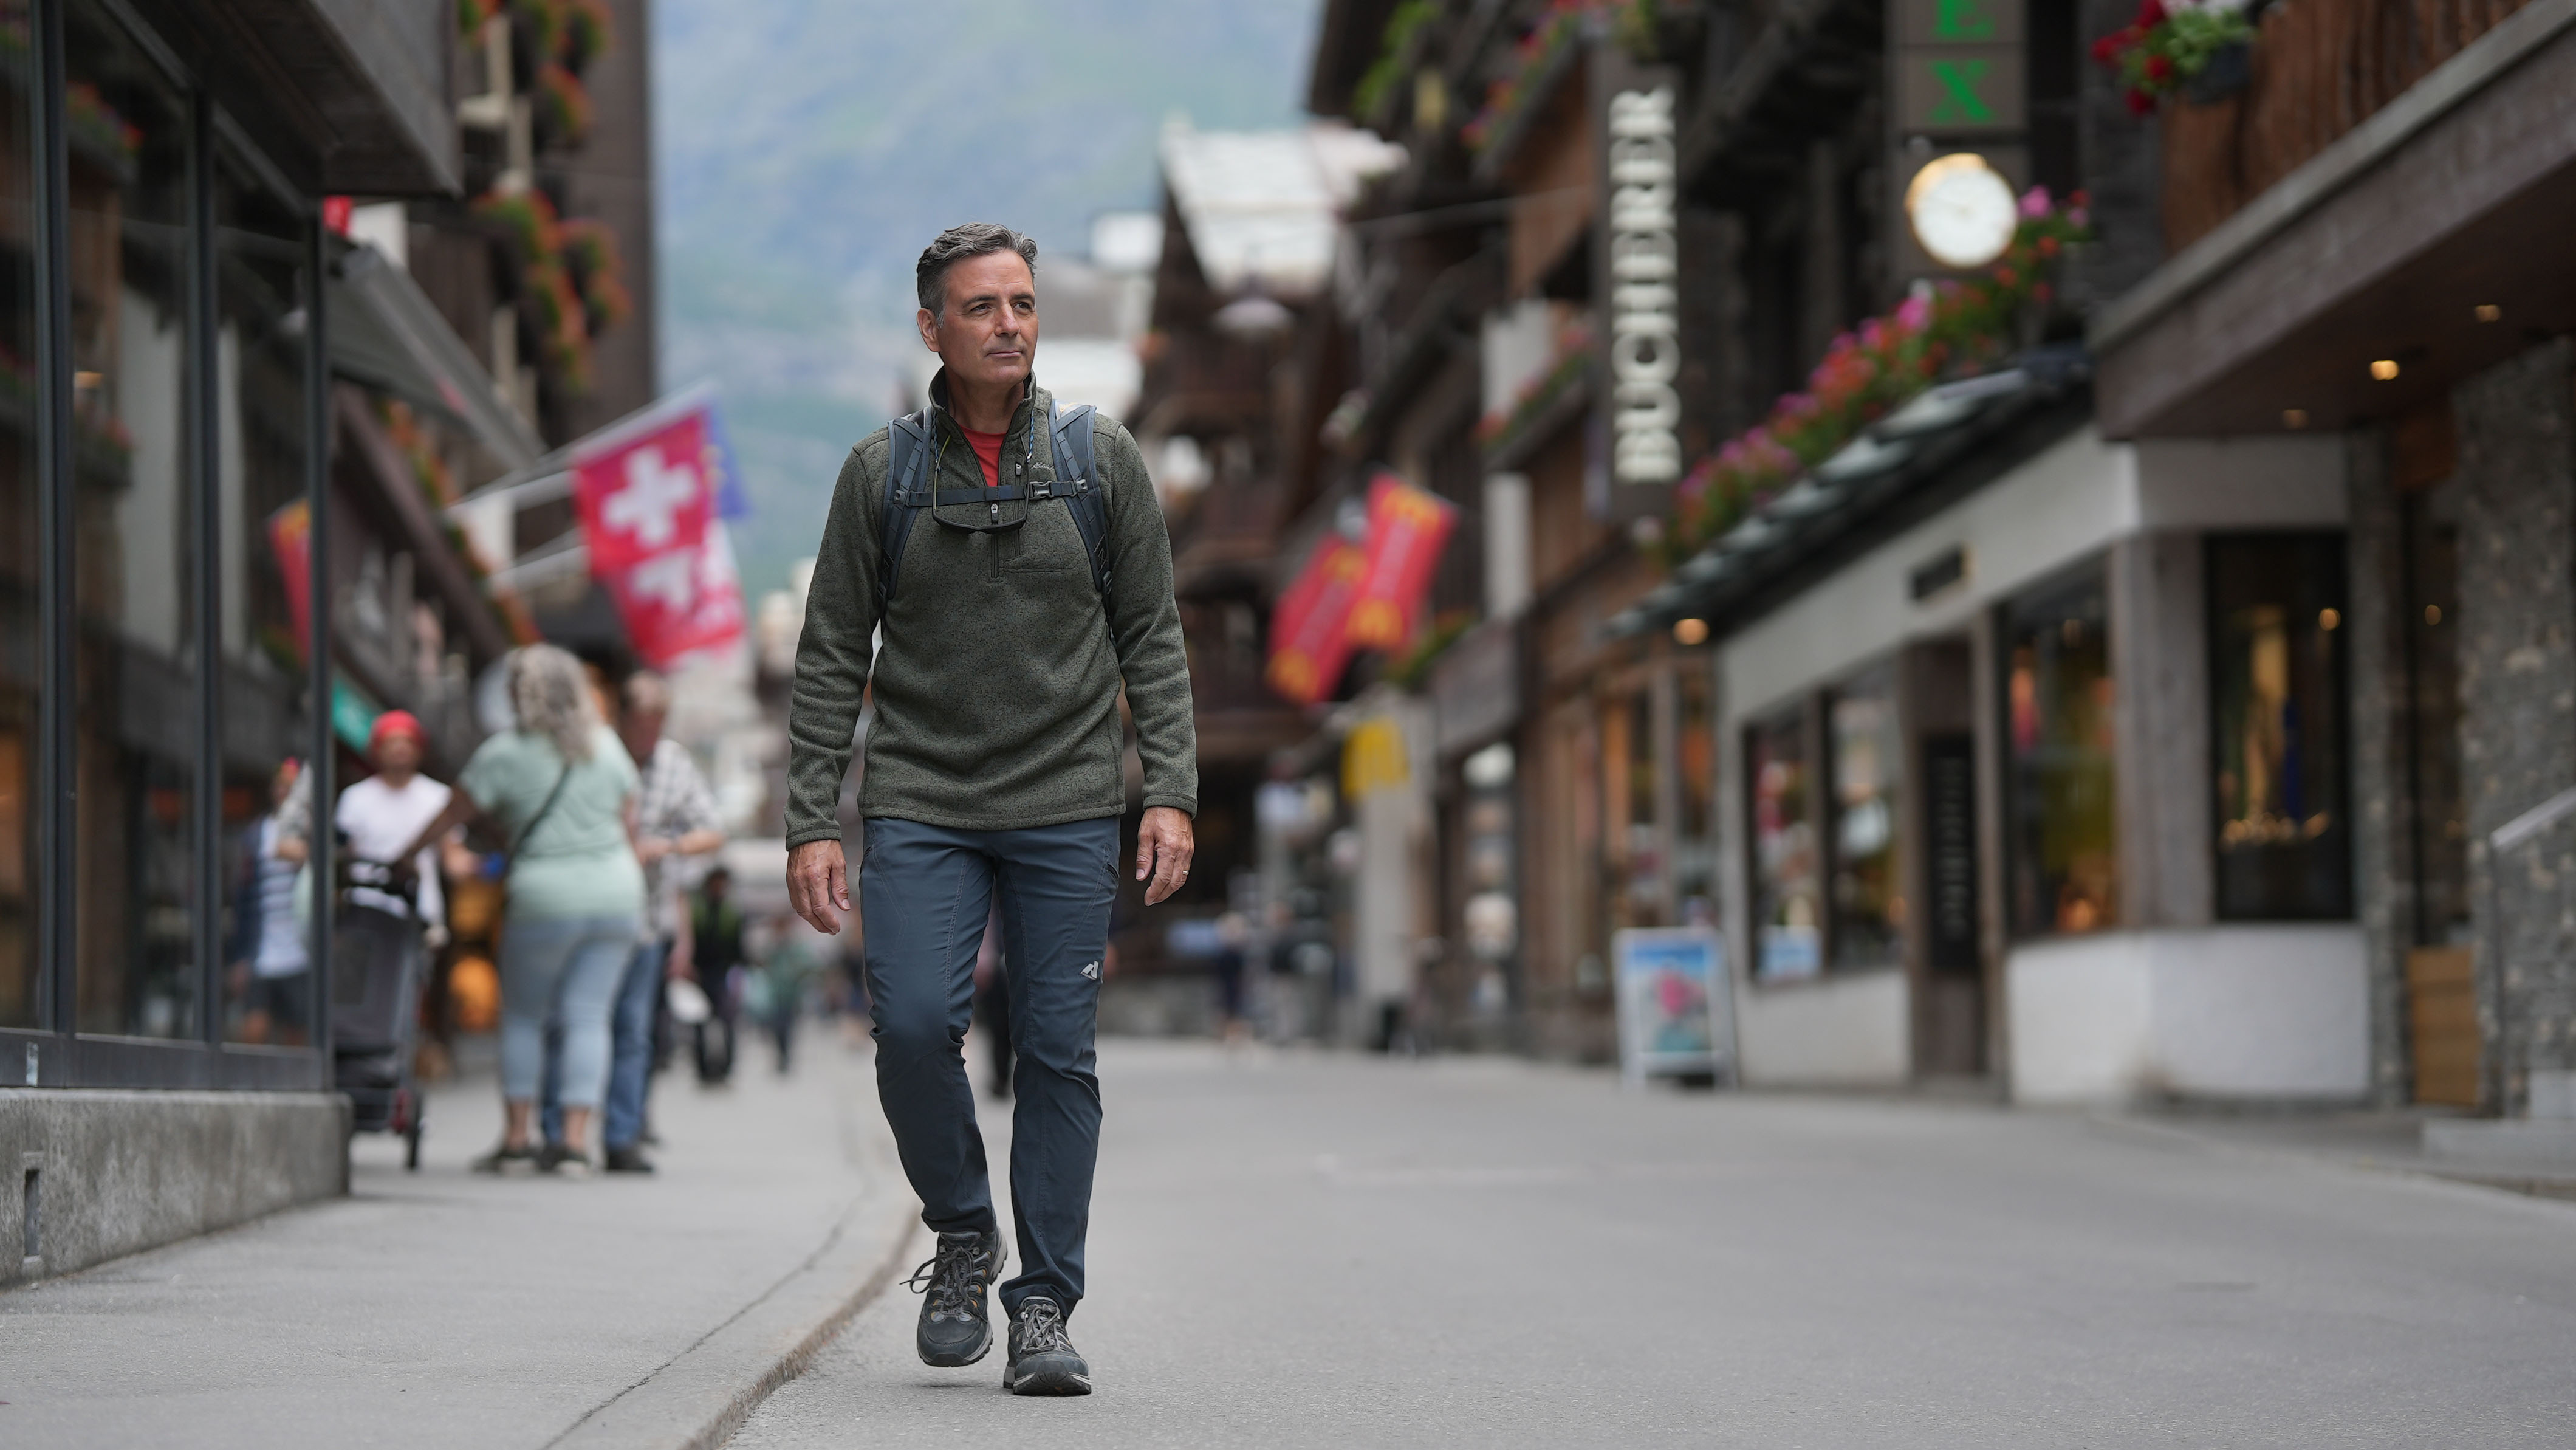 Host Jeff Wilson strolls the streets of Zermatt Switzerland at the base of the Matterhorn. Download a zipped file of promotional materials in the Additional Assets section below.